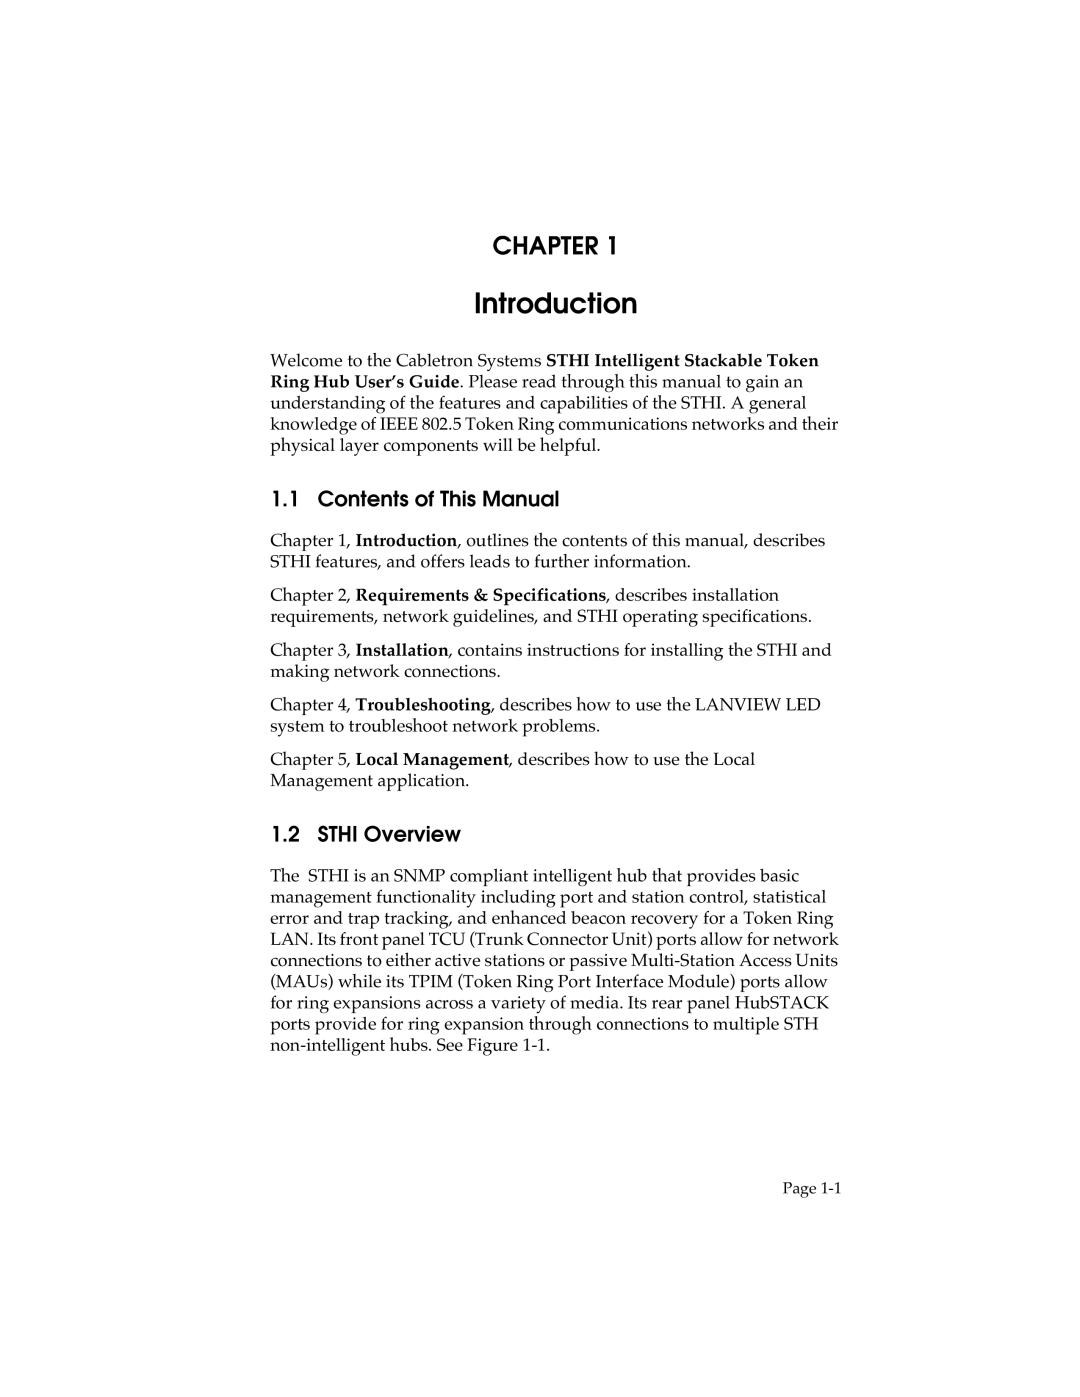 Cabletron Systems manual Introduction, Chapter, Contents of This Manual, STHI Overview 